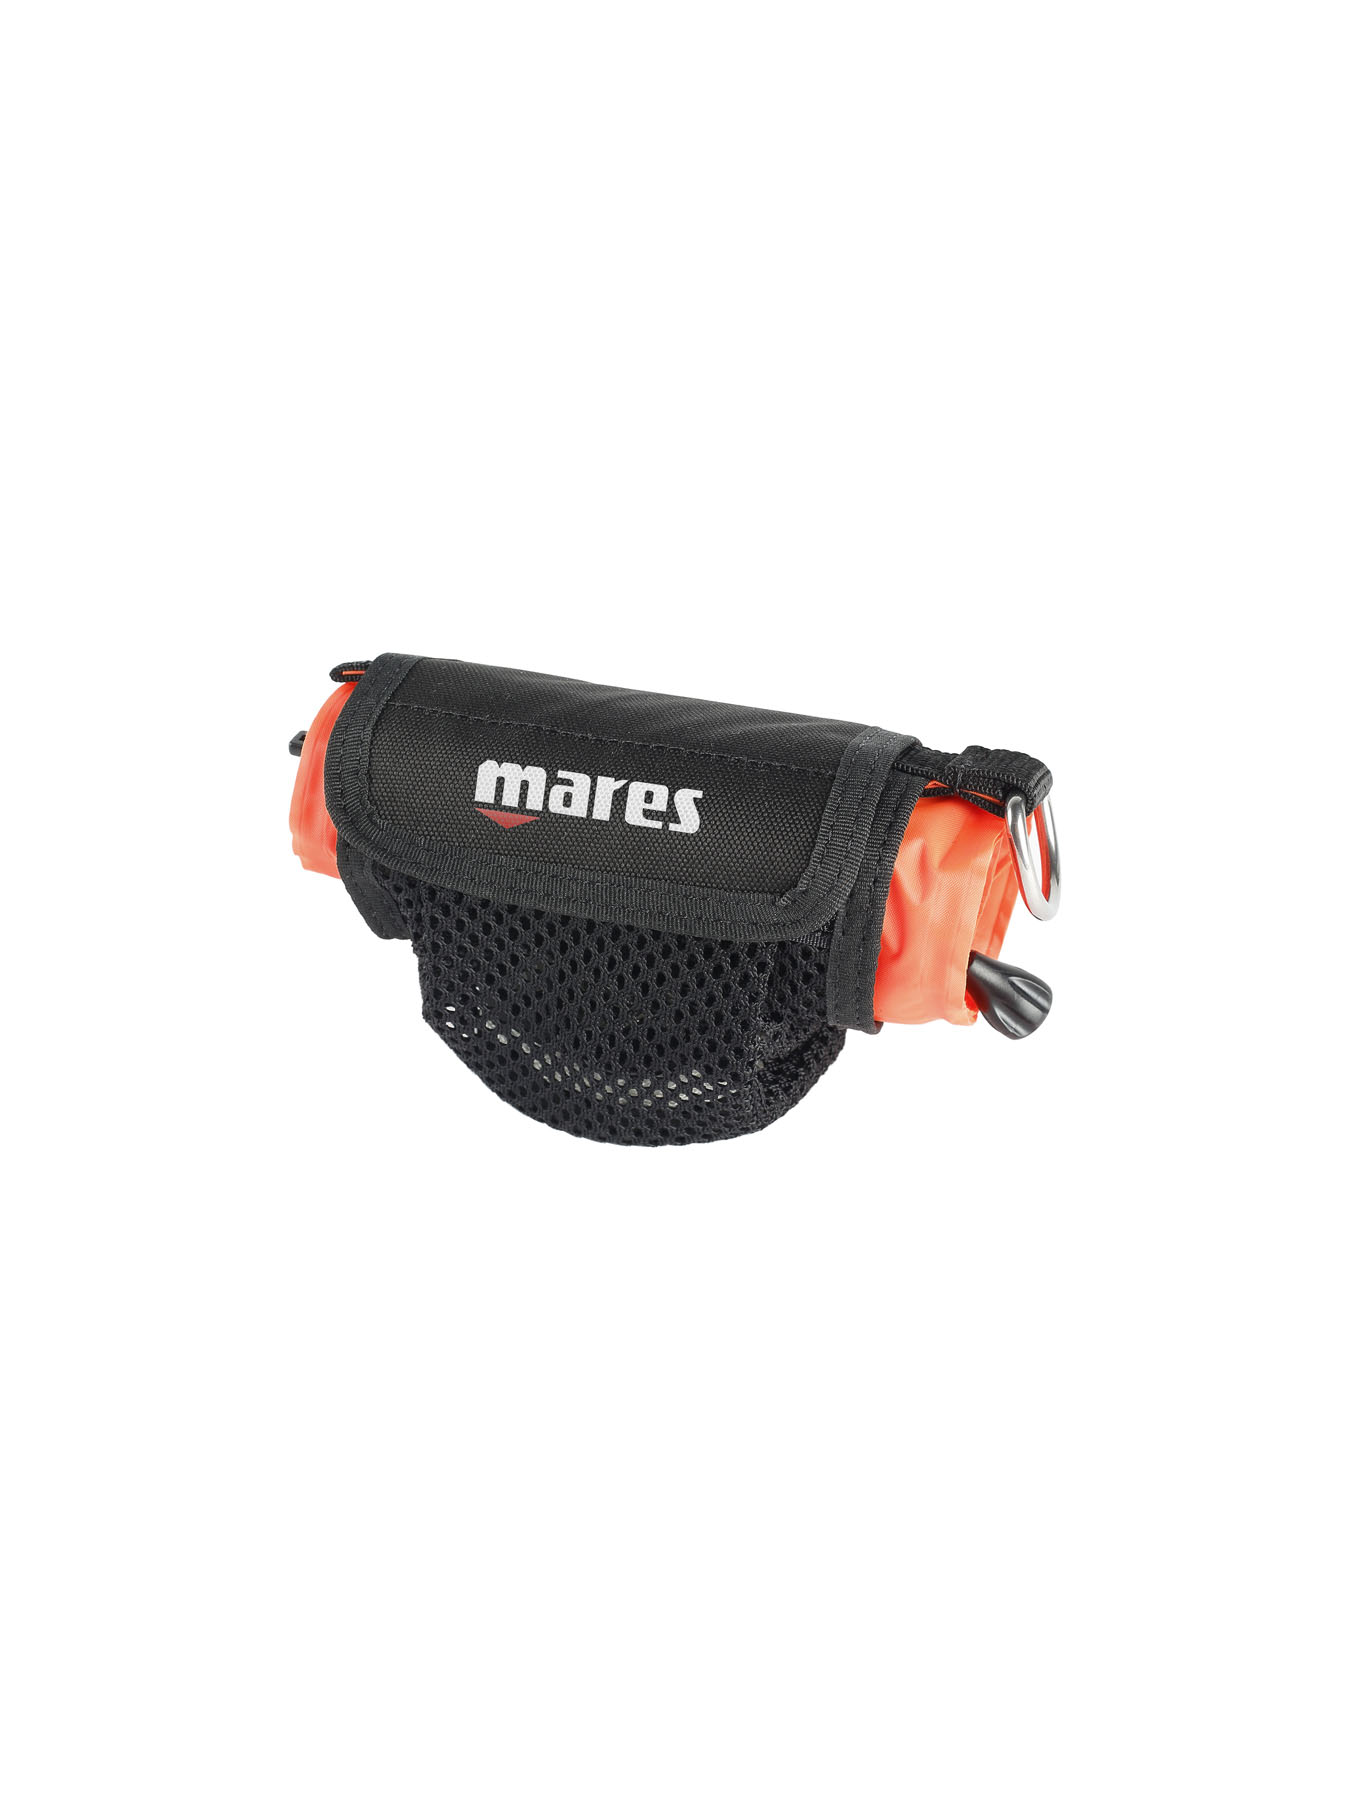 Mares Diver Marker Boje -All in One